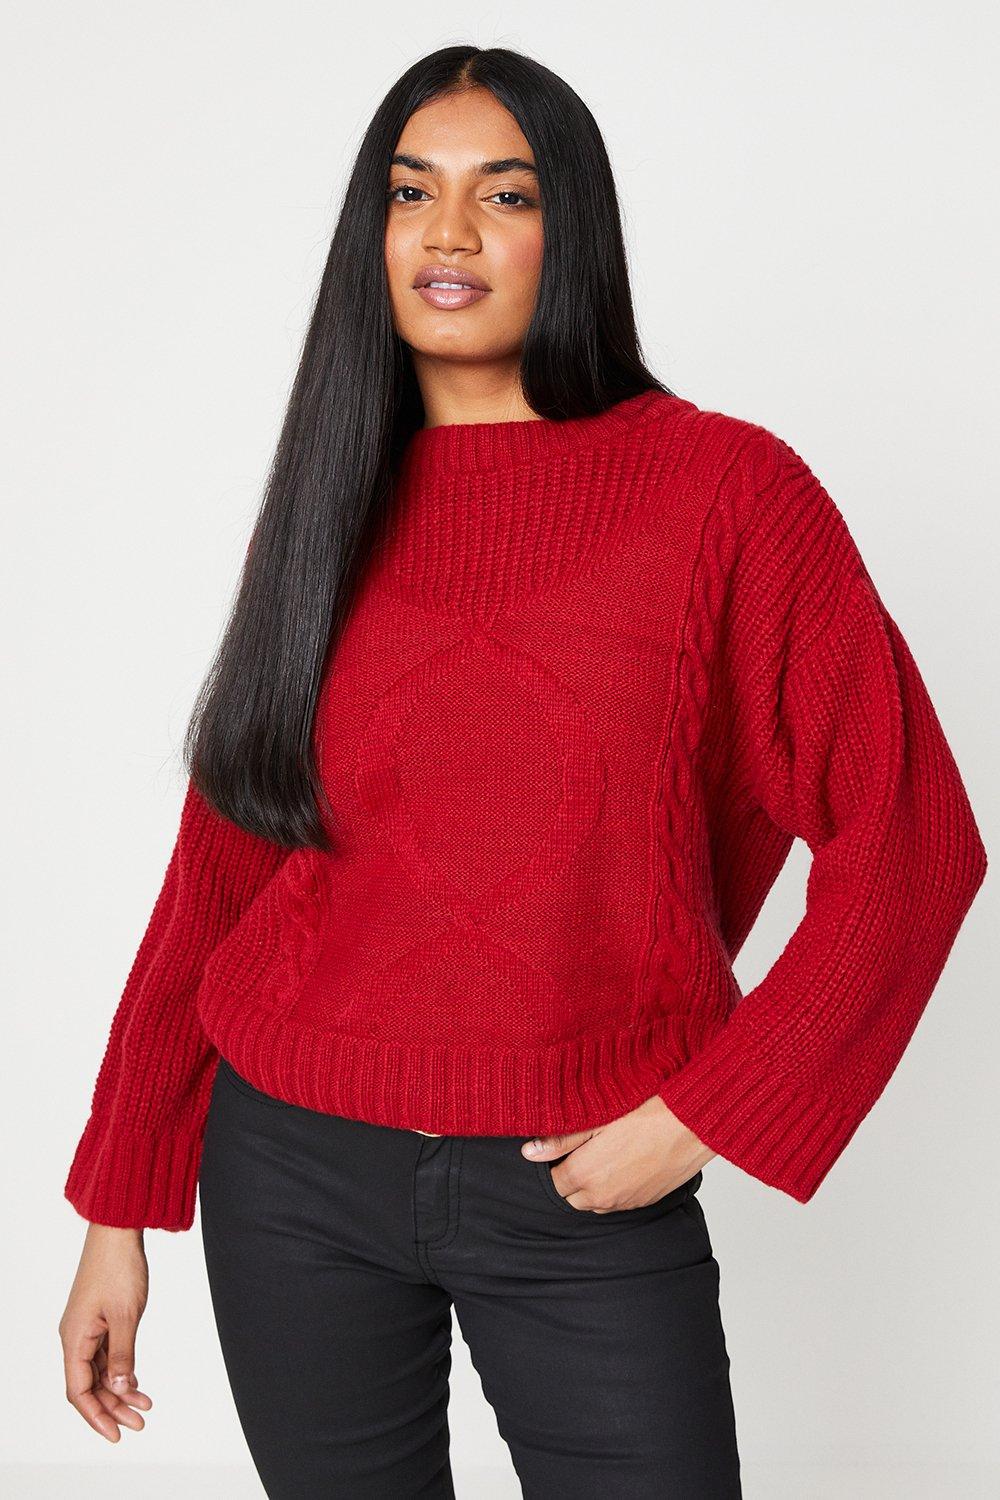 Women’s Petite Wide Sleeve Cable Fluffy Knit Jumper - red - S